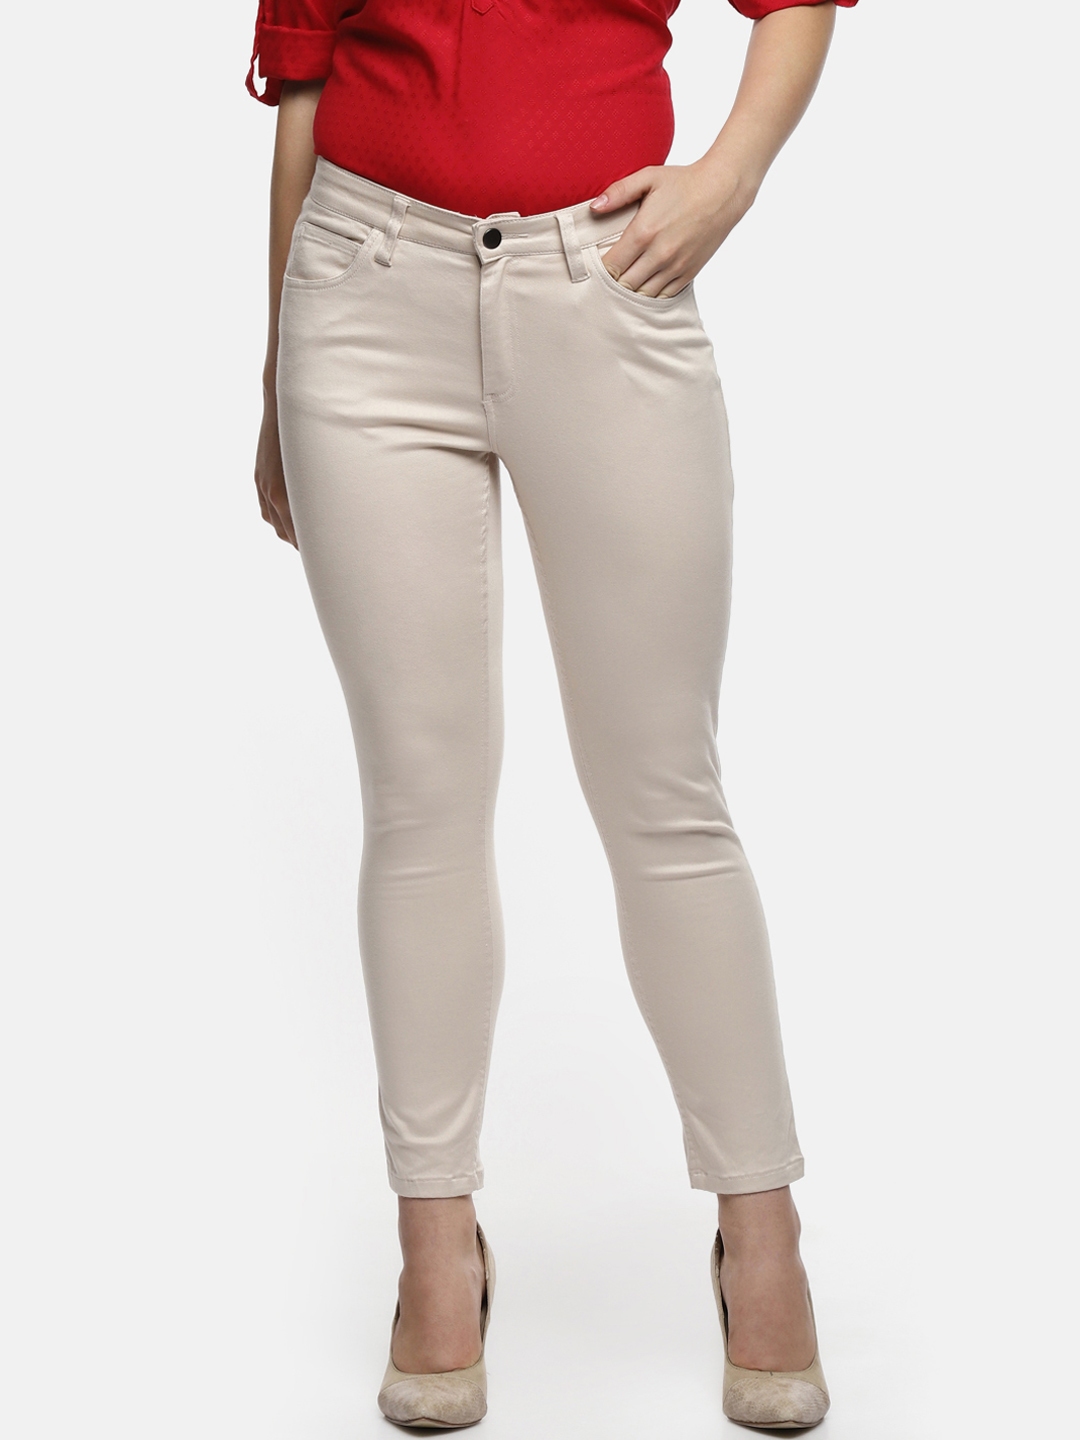 Buy White Trousers  Pants for Women by Annabelle by Pantaloons Online   Ajiocom